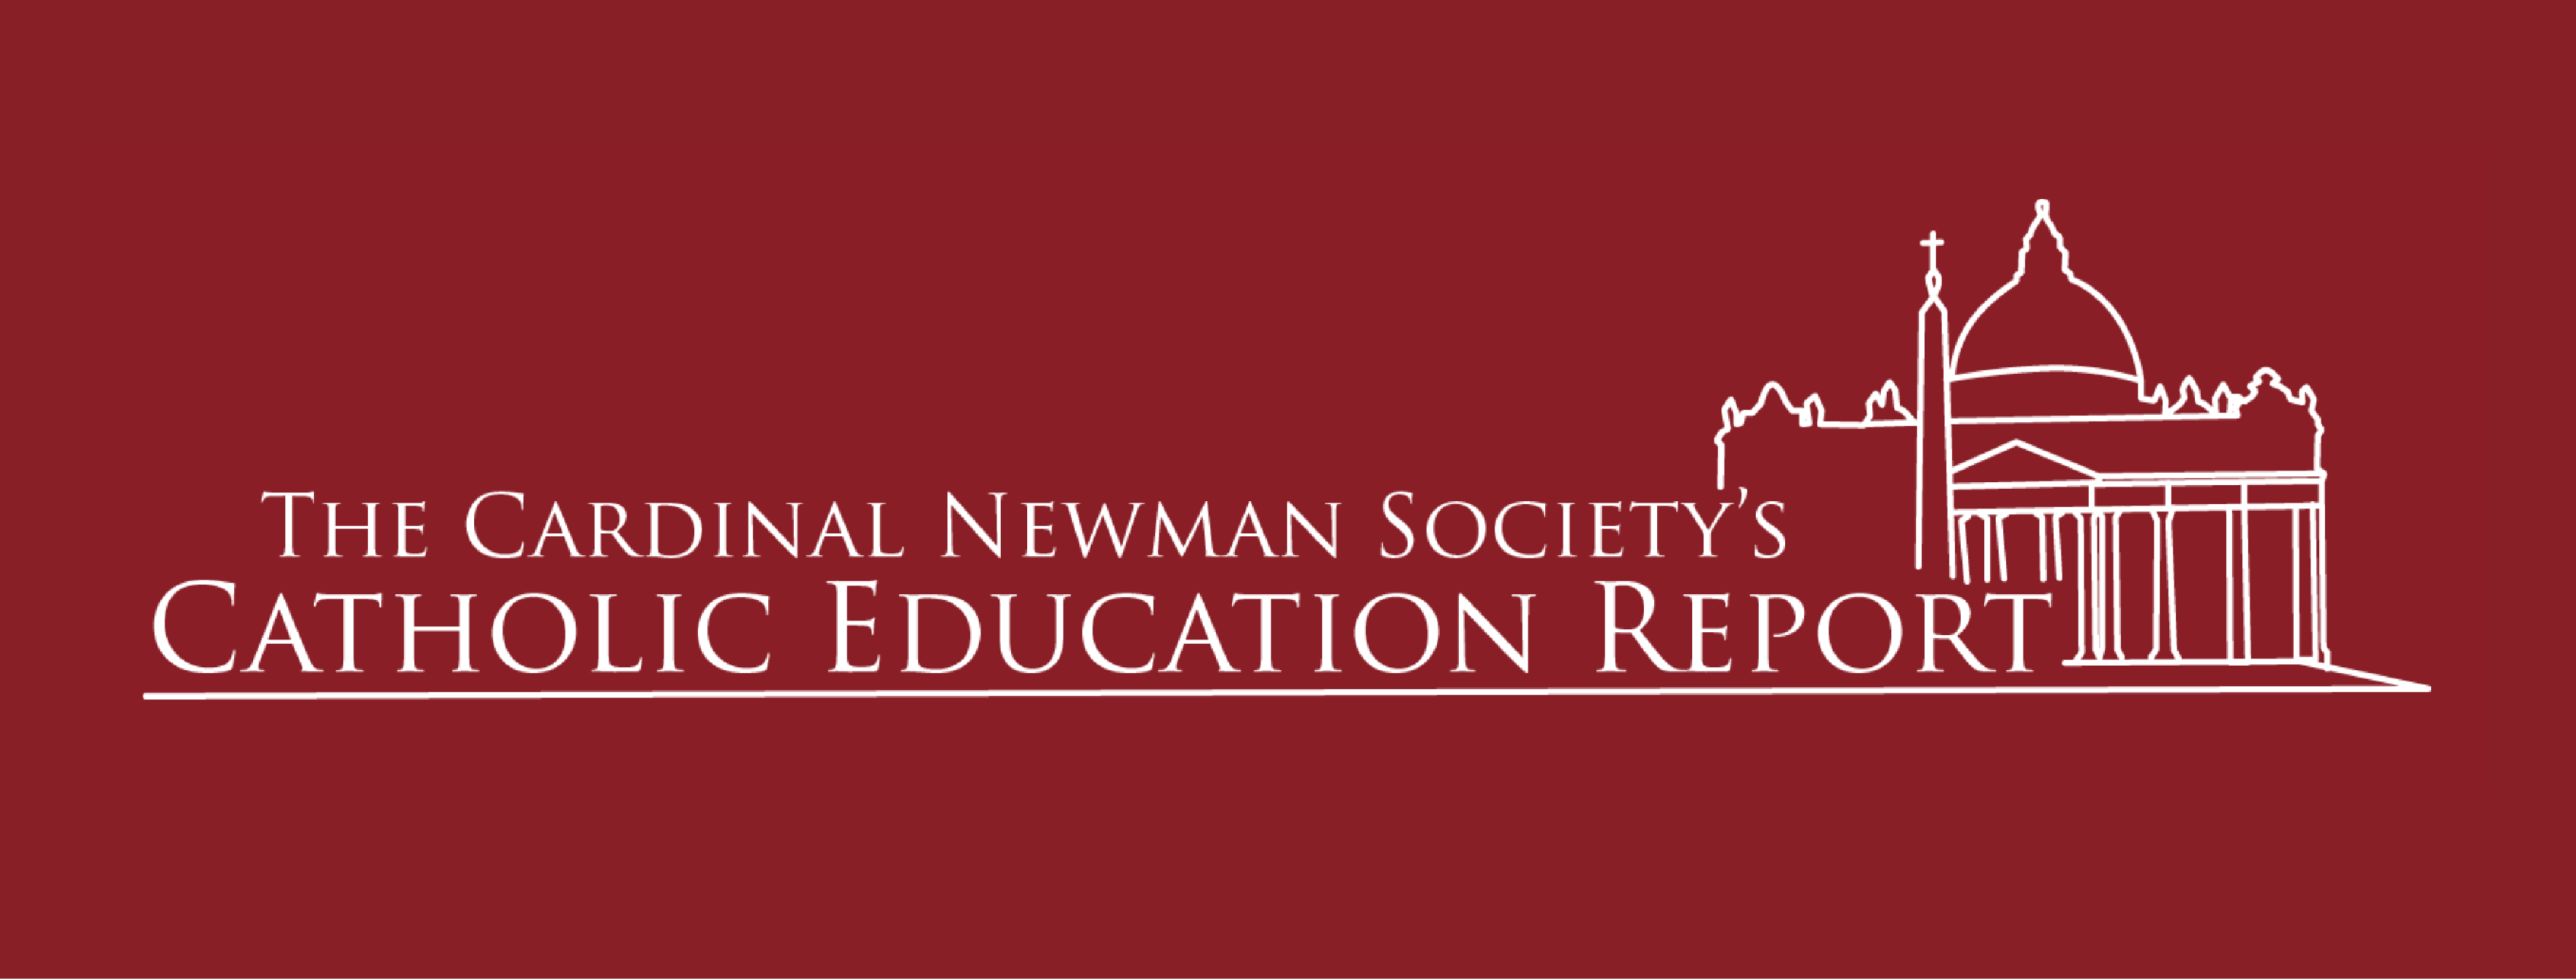 Fighting Pornography on Catholic College Campuses - Cardinal Newman Society